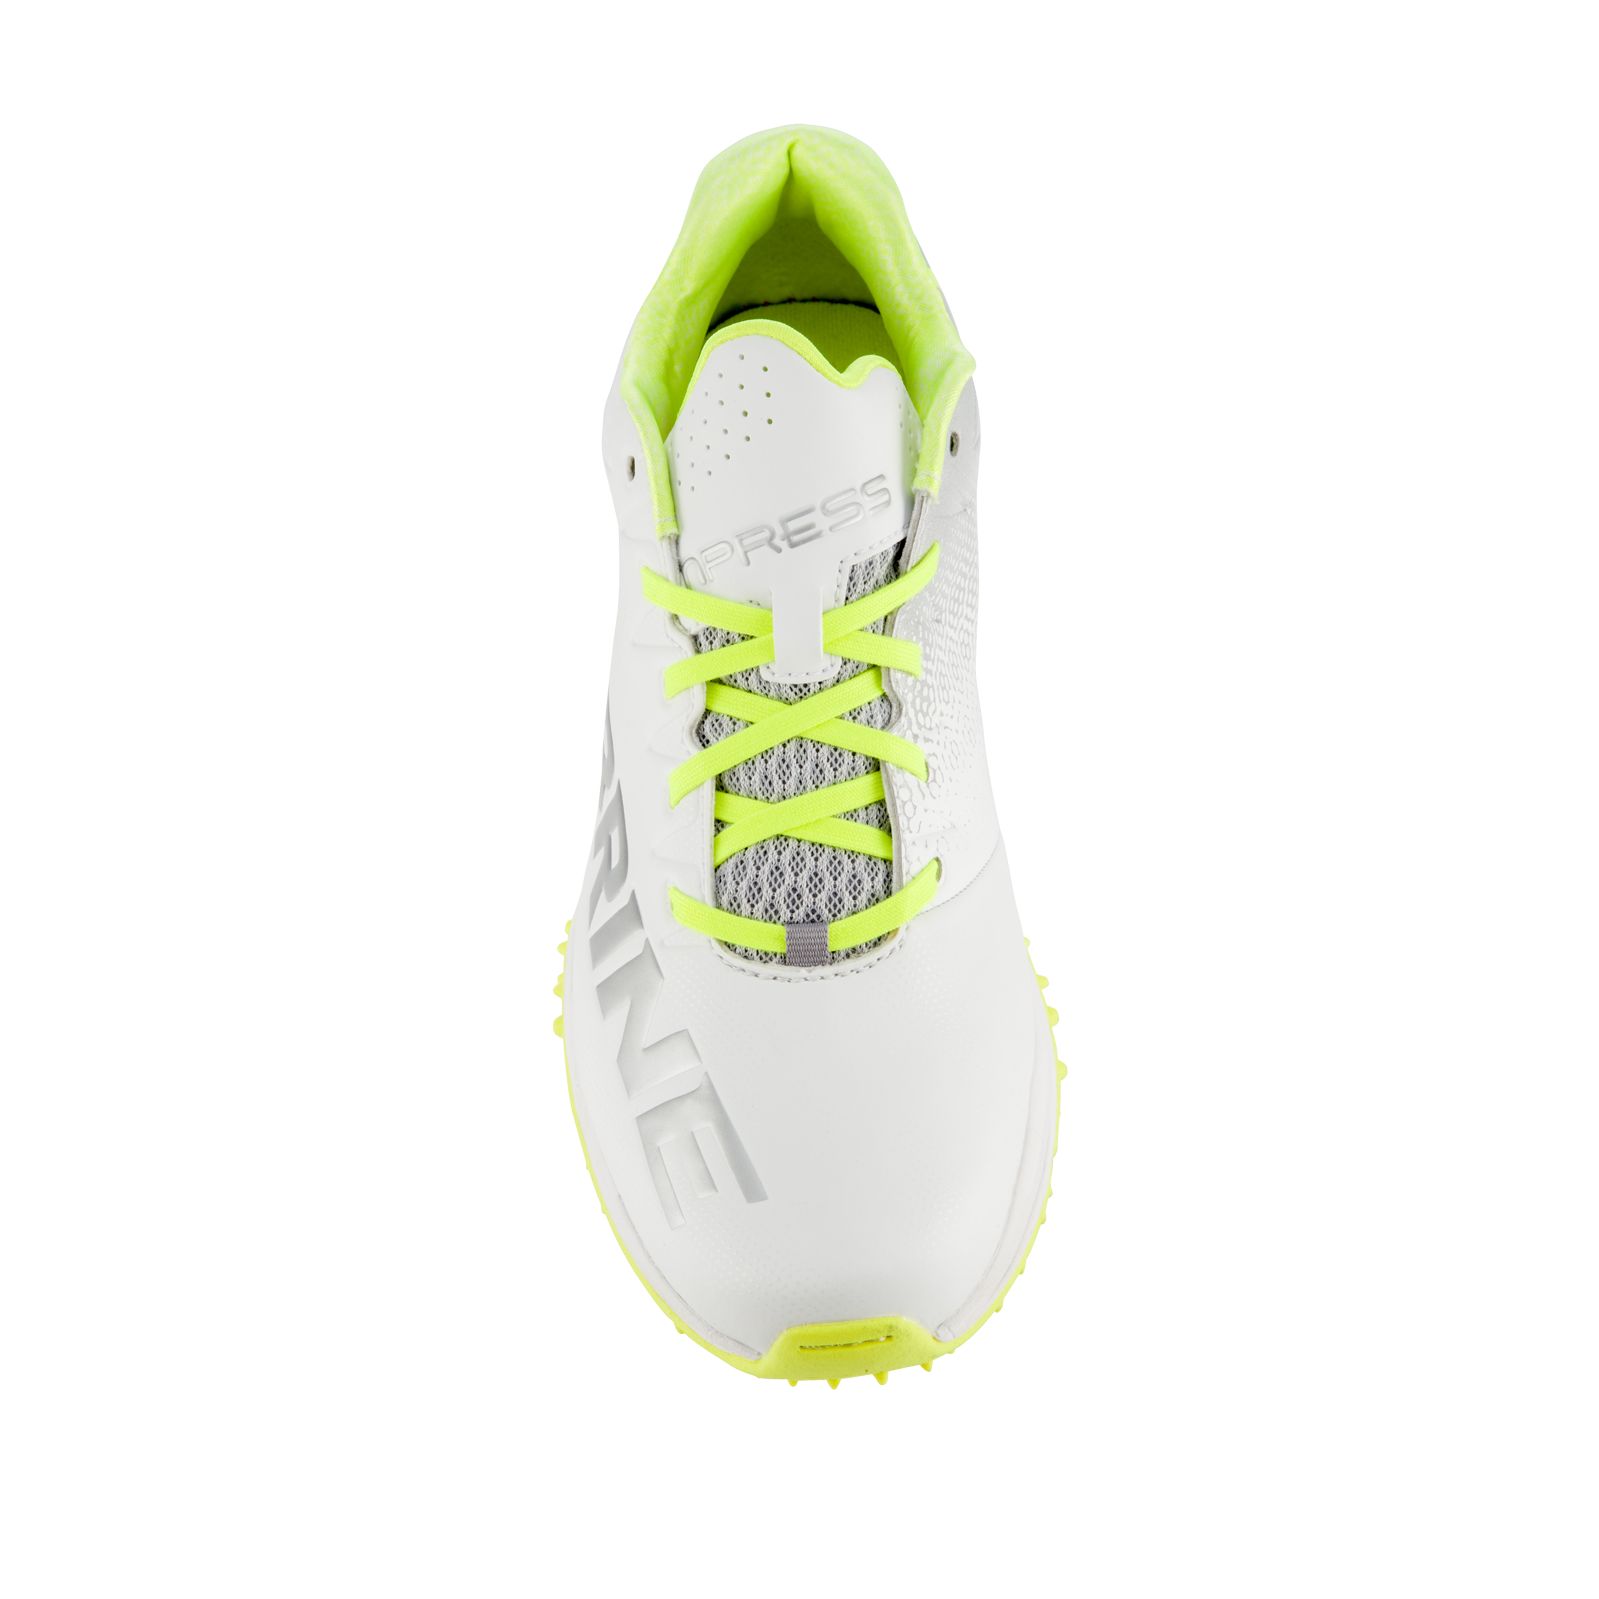 Empress 2.0 Cleat Turf, White image number 3